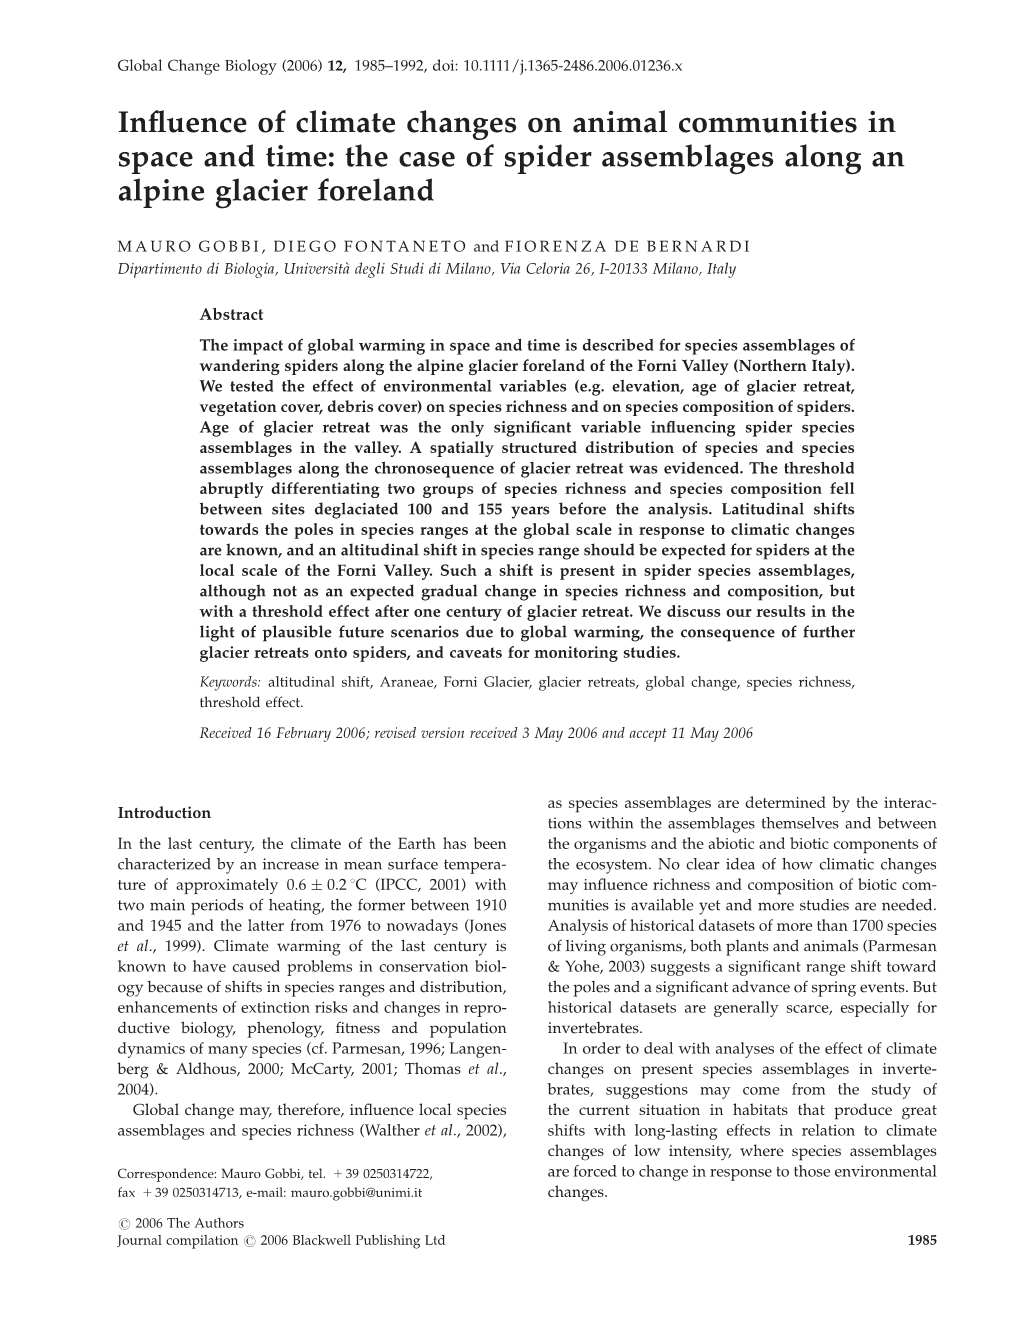 The Case of Spider Assemblages Along an Alpine Glacier Foreland